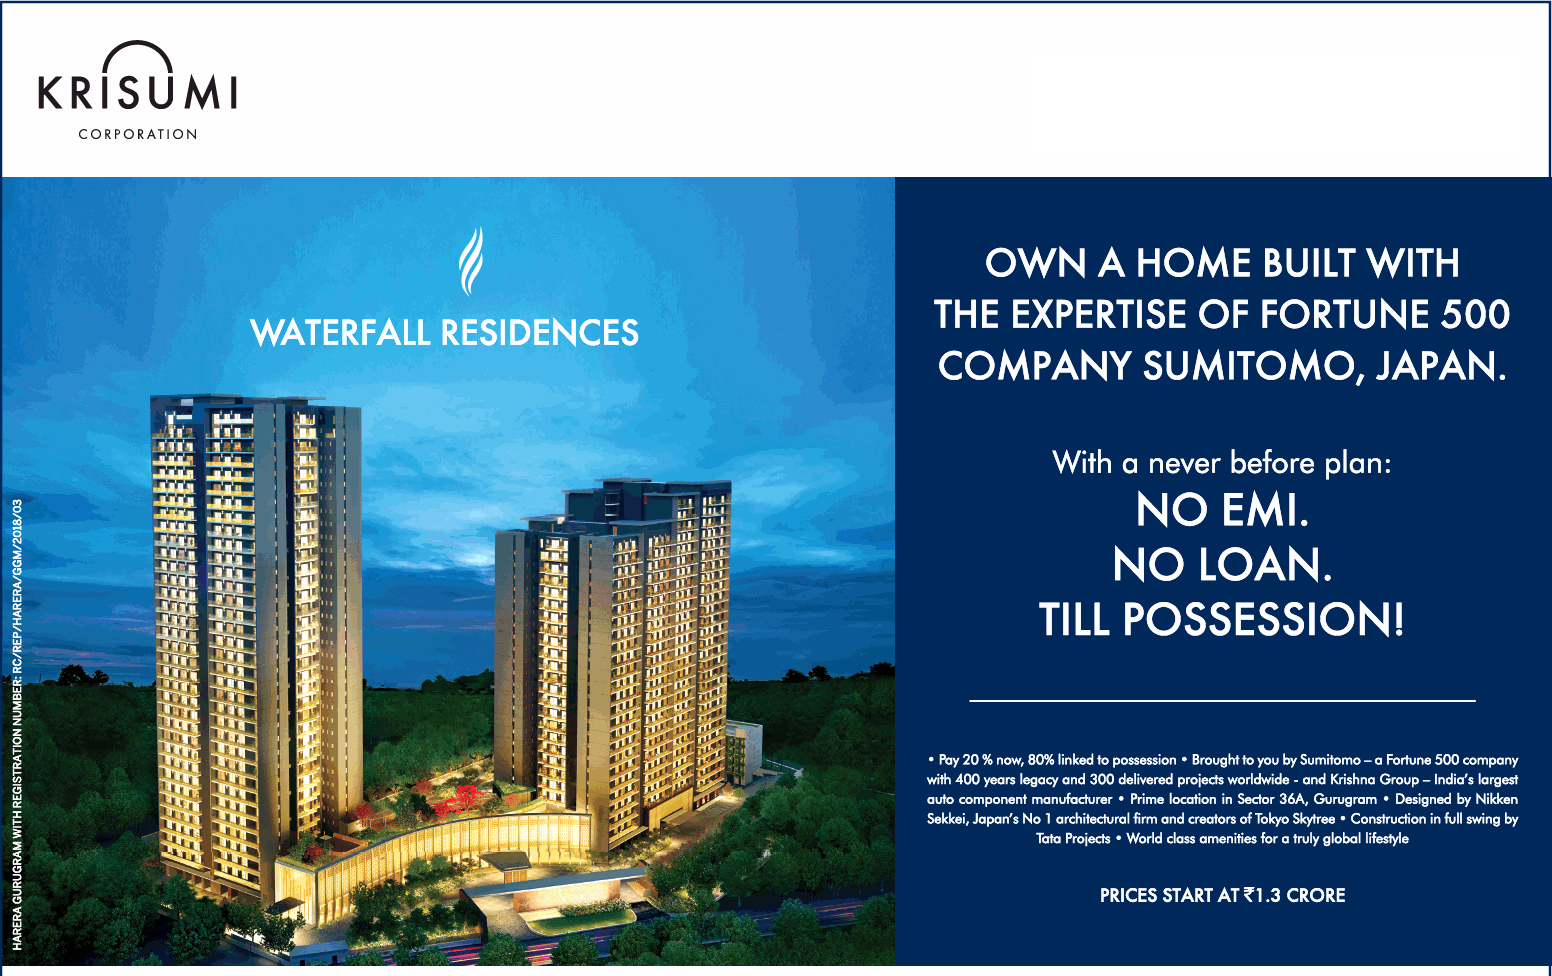 With a never before plan no EMI, no loan, till possession at Krisumi Waterfall Residences, Gurgaon Update